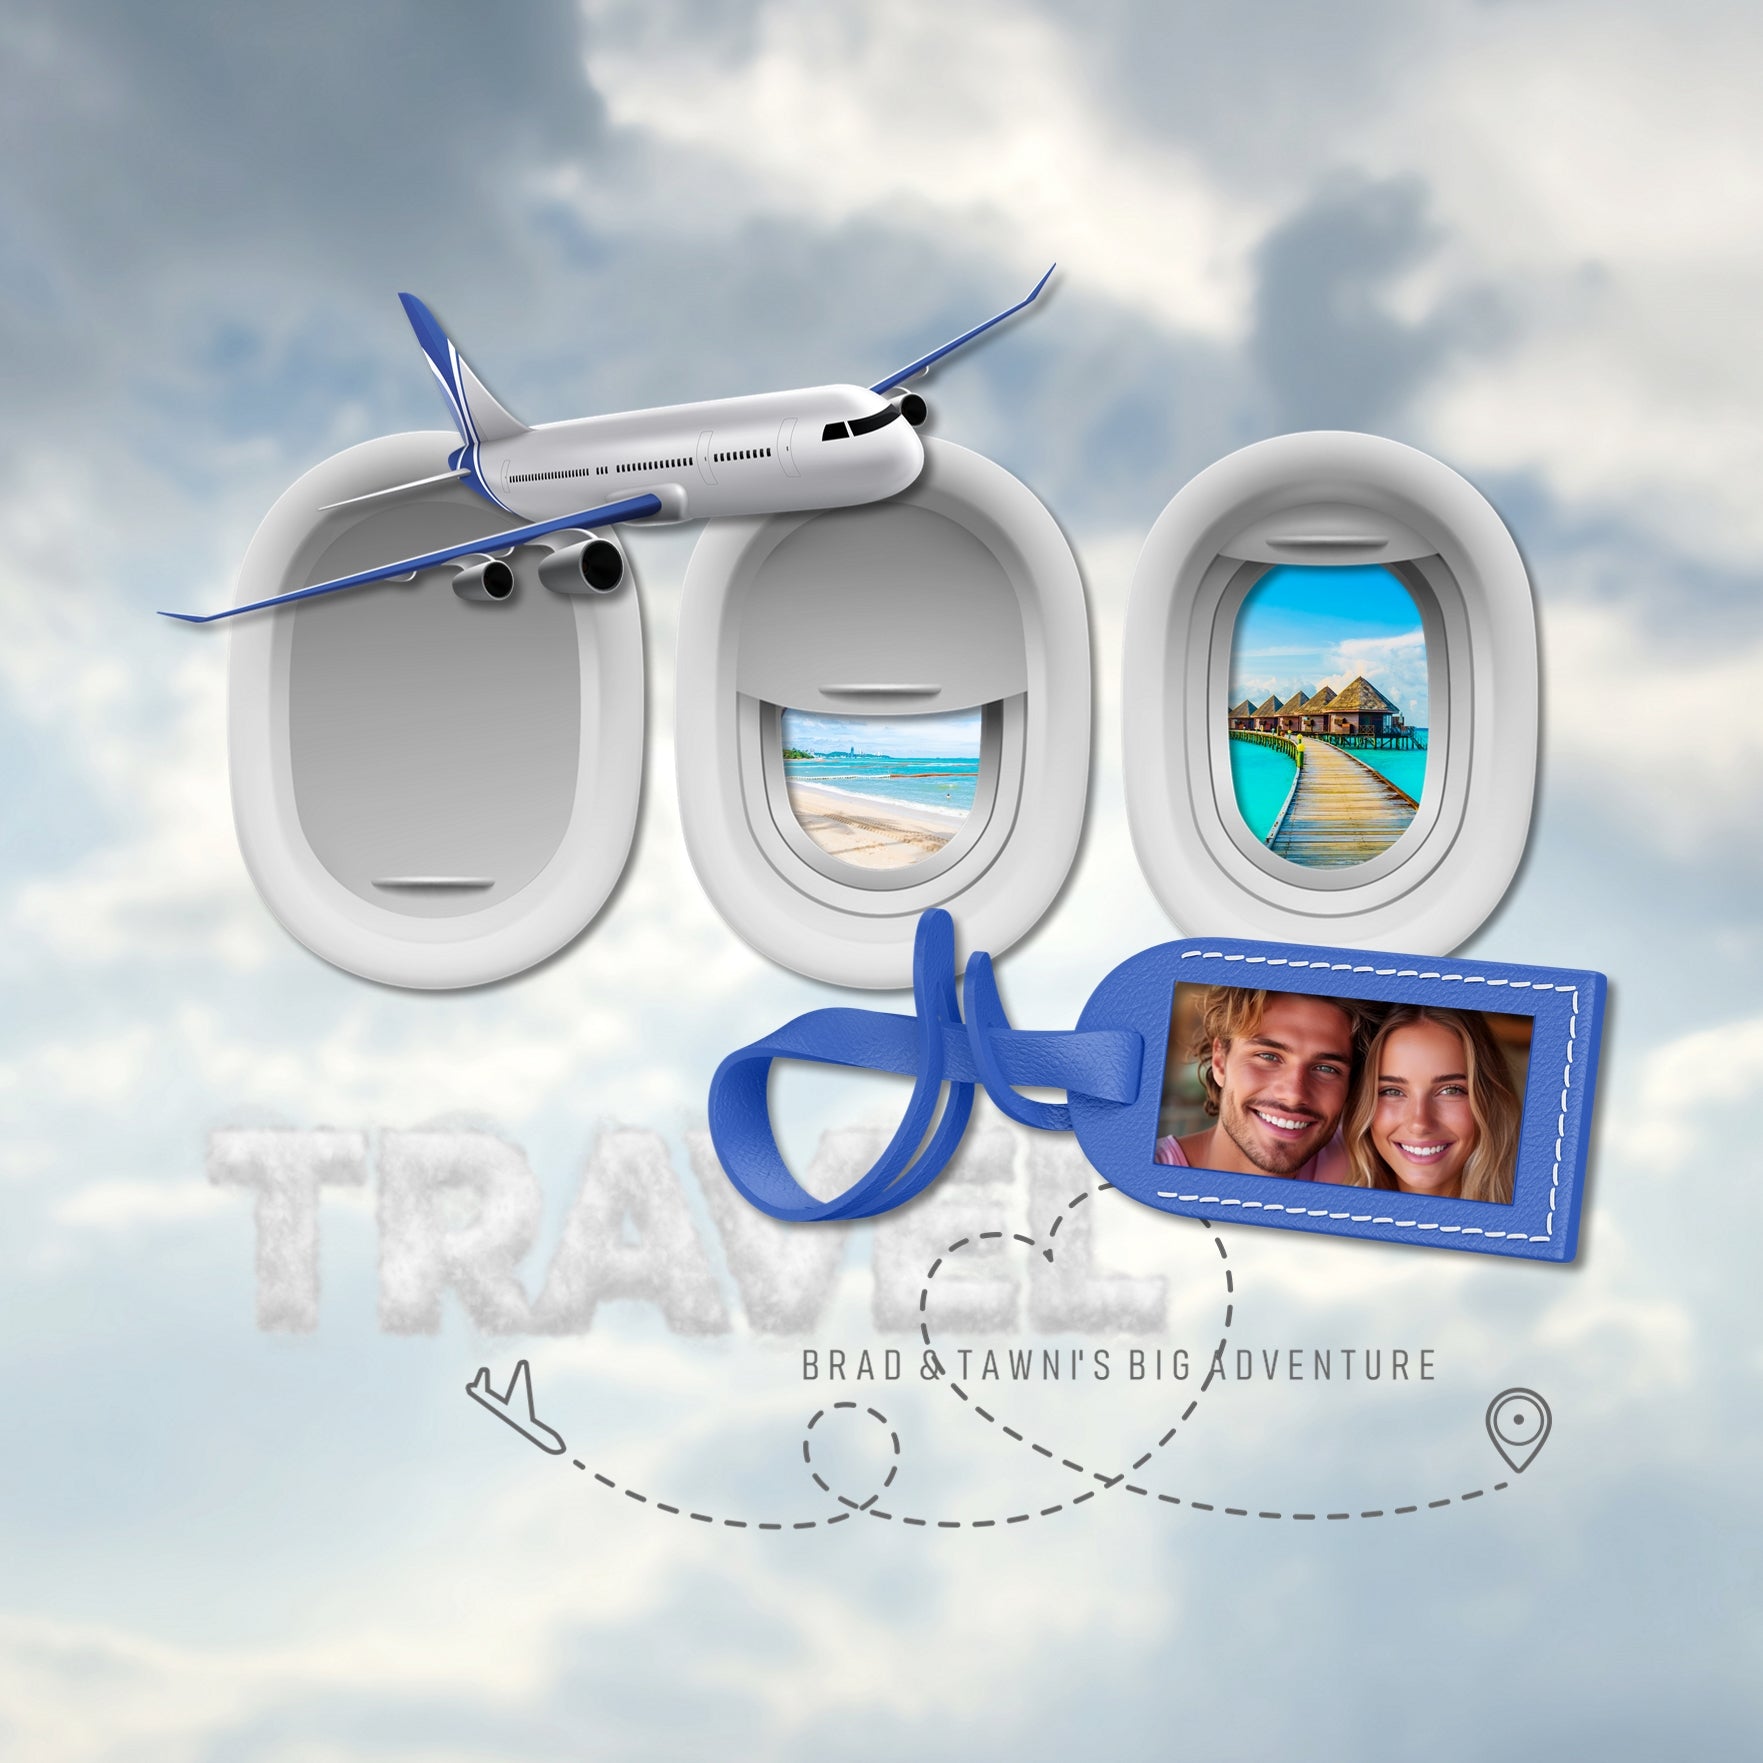 If you are taking to the air for a holiday, then get scrapping with this fun airport, aviation, airplane, and flight themed digital art bundle by Lucky Girl Creative. Whether it is a business trip or for vacation, if you going through an airport and into the sky on your way to your destination, this travel kit is for you. Great for those in the airline industry, flight attendants, airport traffic control, engineers, airport staff, and airplane hobbyists, too!